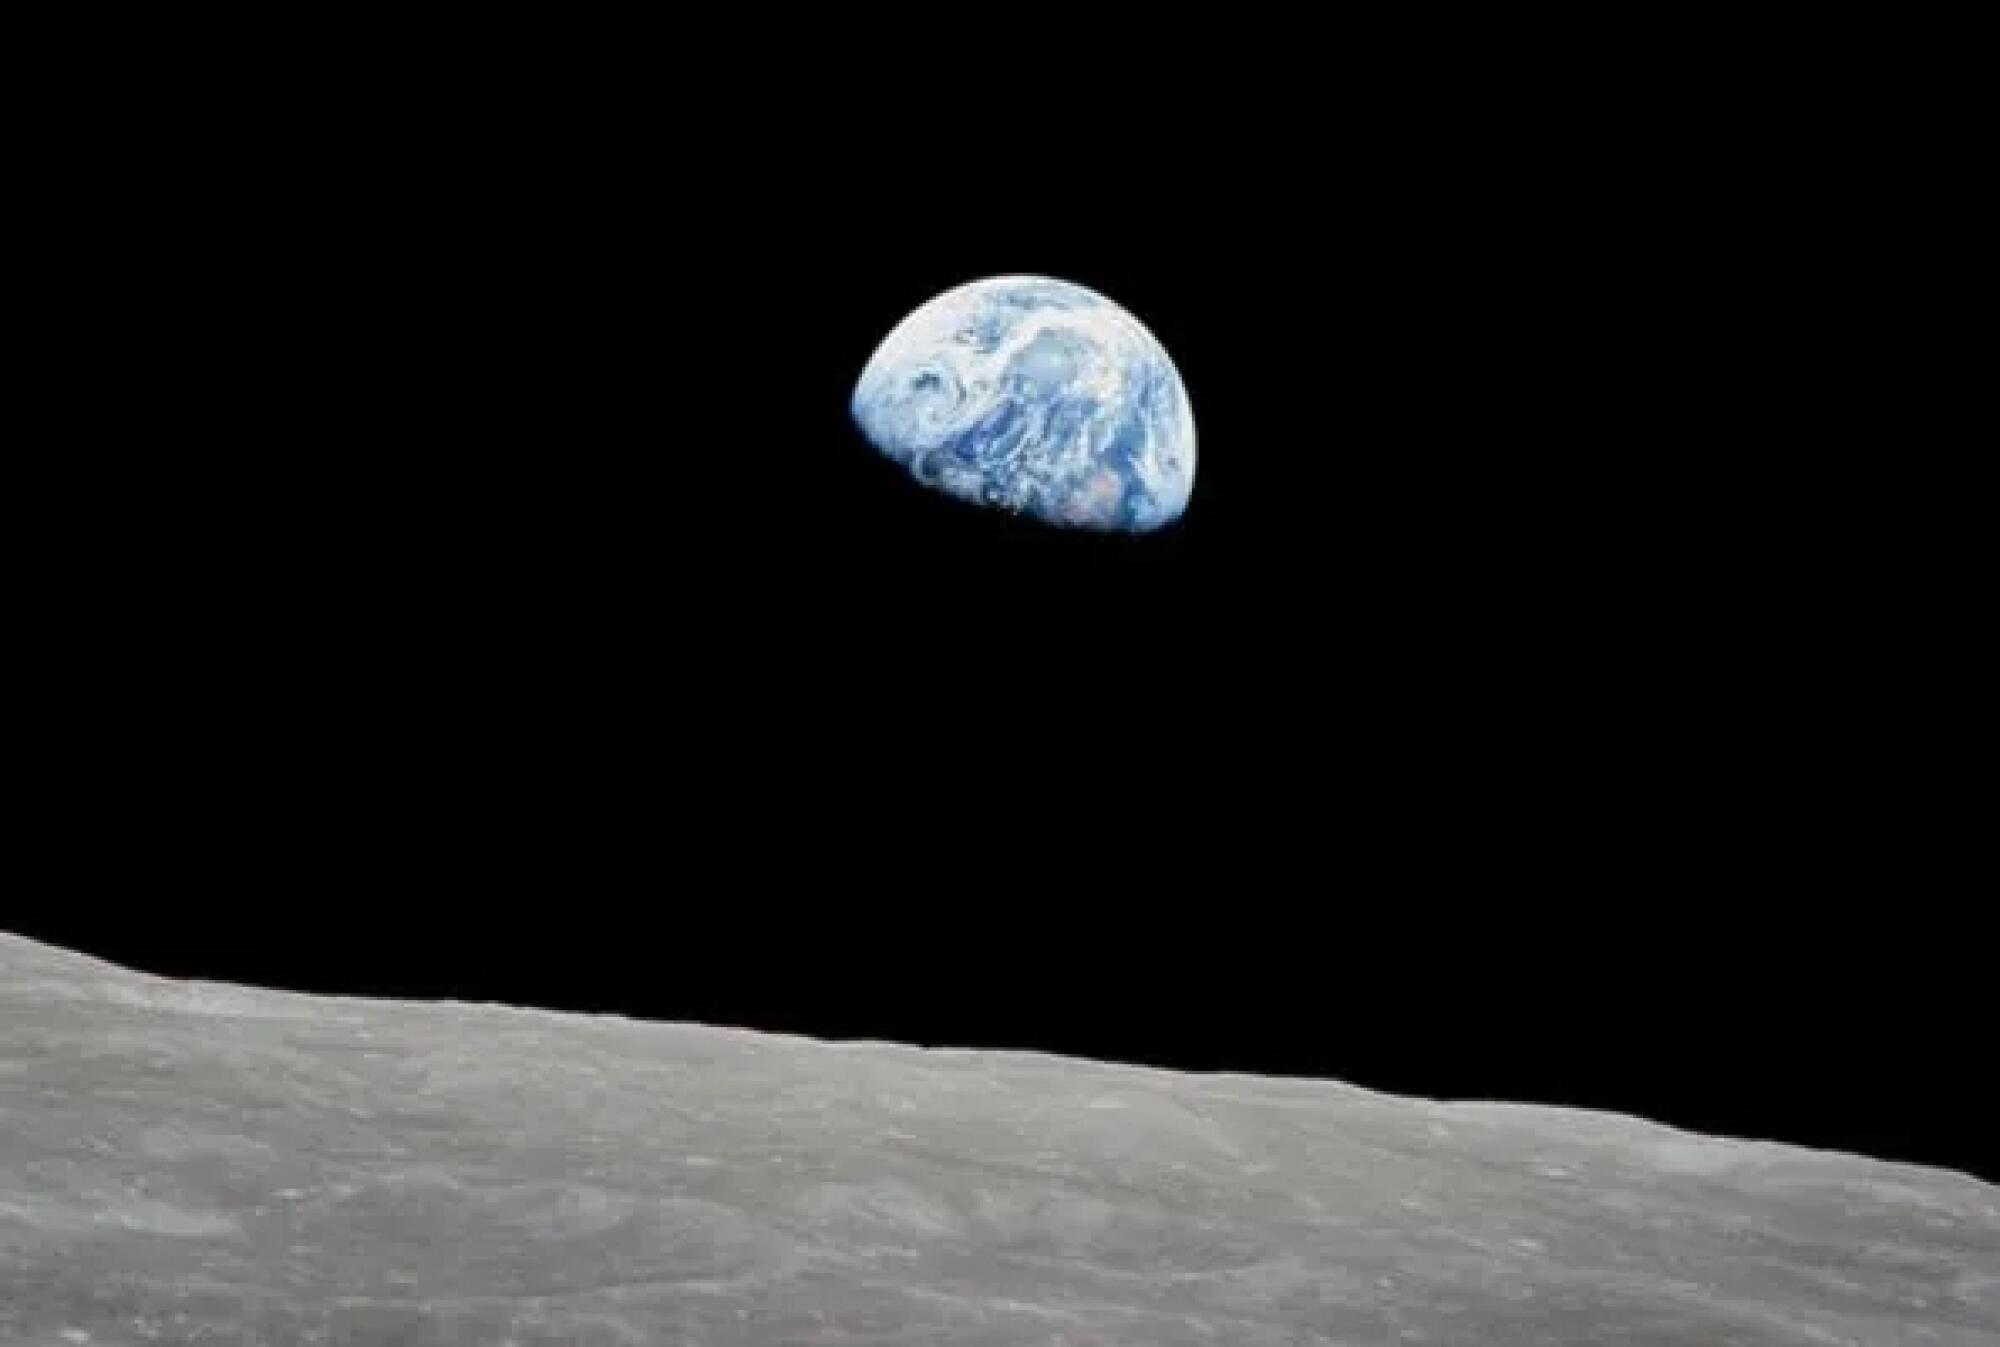 A gibbous Earth in a black sky over the gray surface of the moon